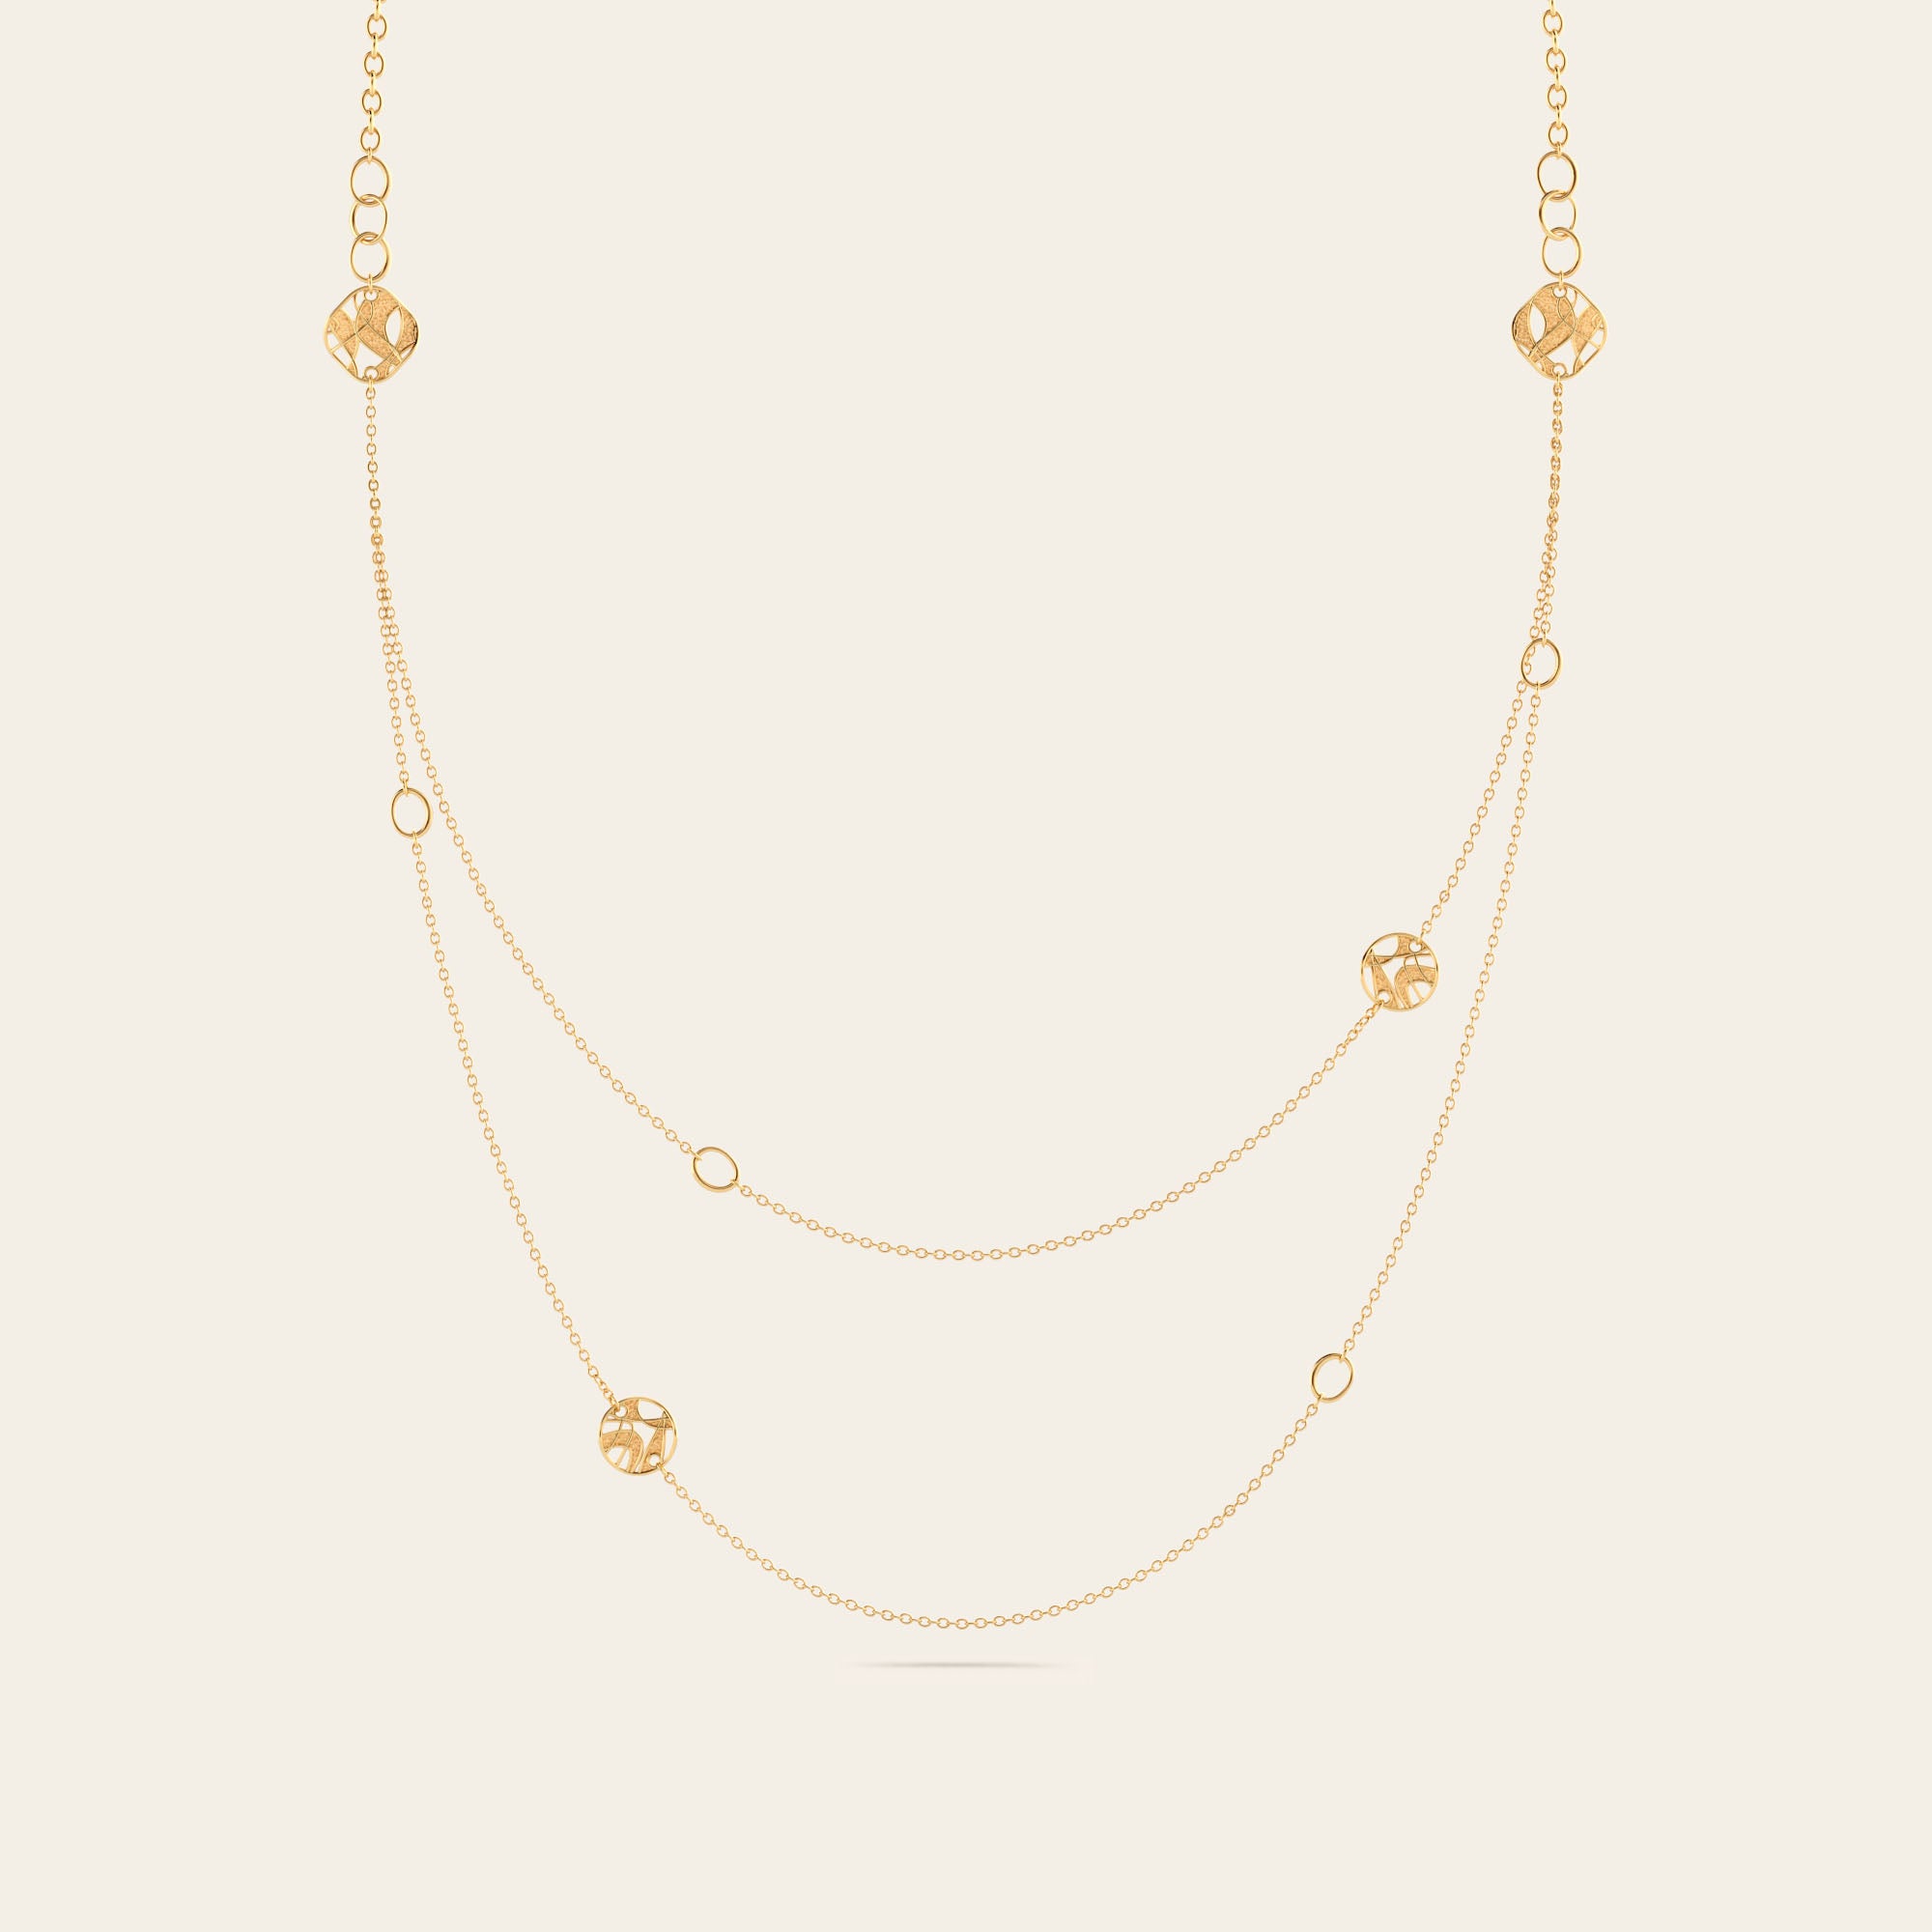 Cascade Double Chain Necklace in 18k Yellow Gold